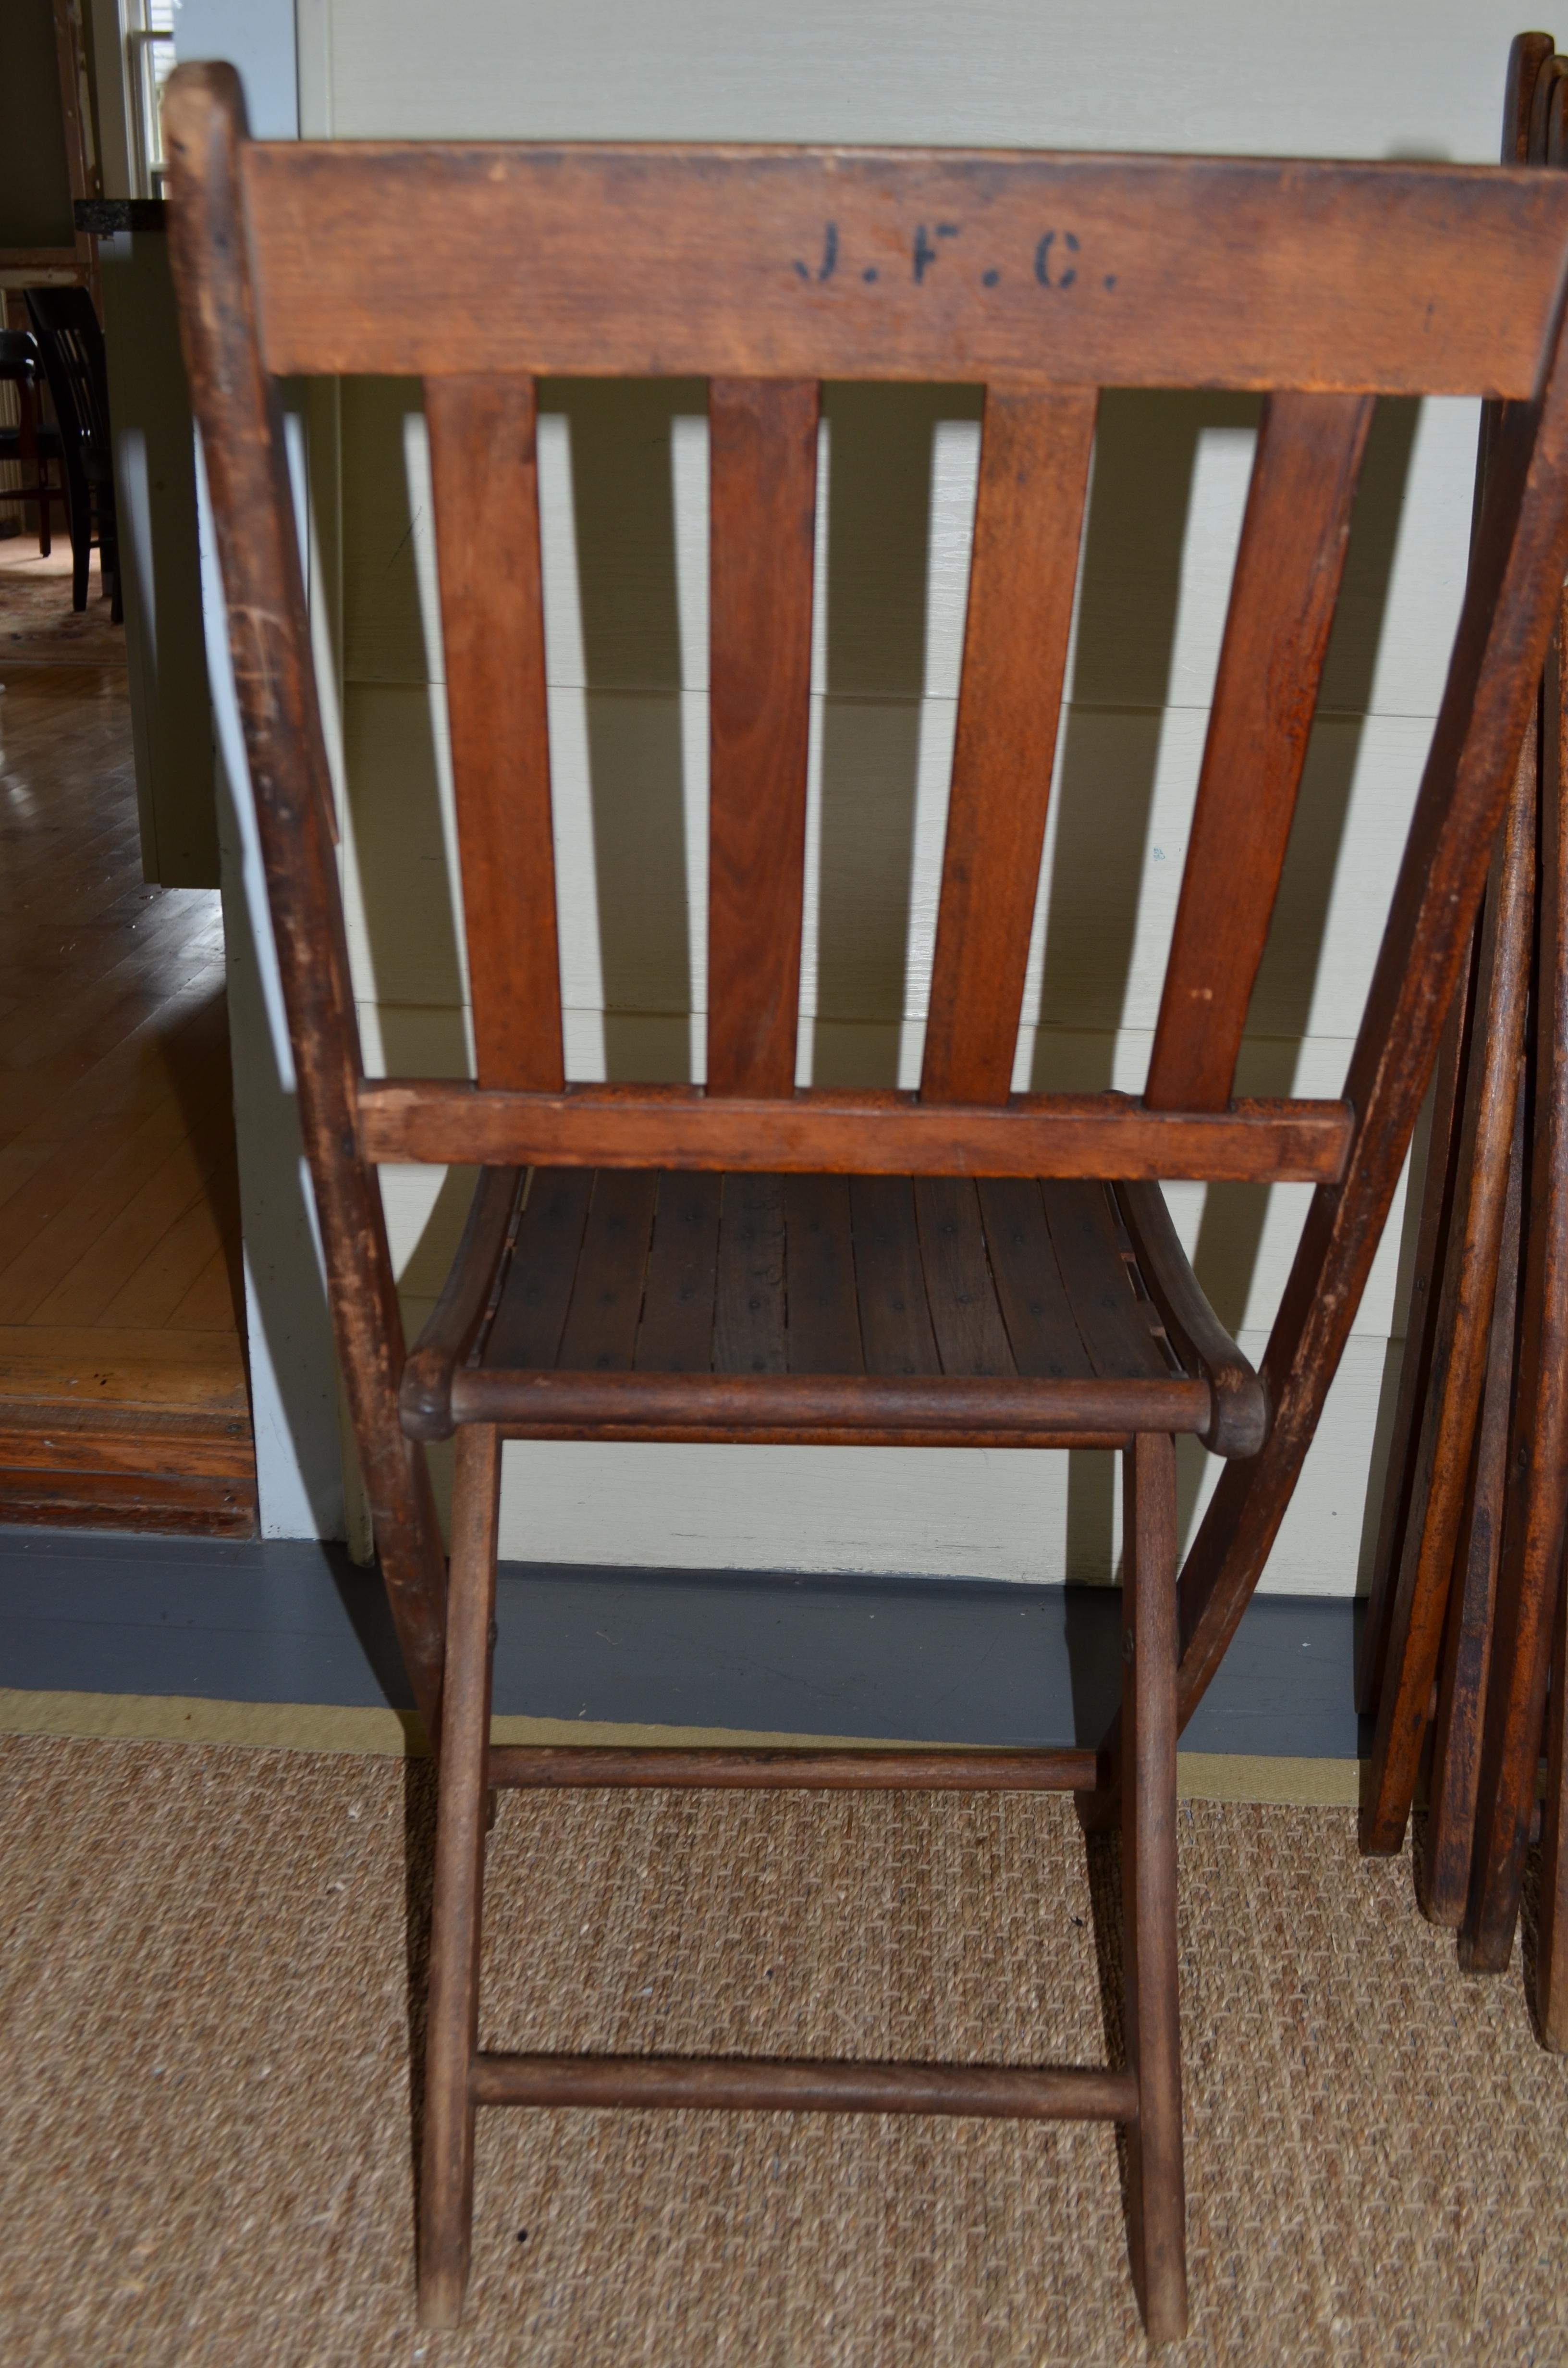 Chairs of Oak, Folding, Late 19th Century European, Set of 4, Multiple Sets For Sale 9